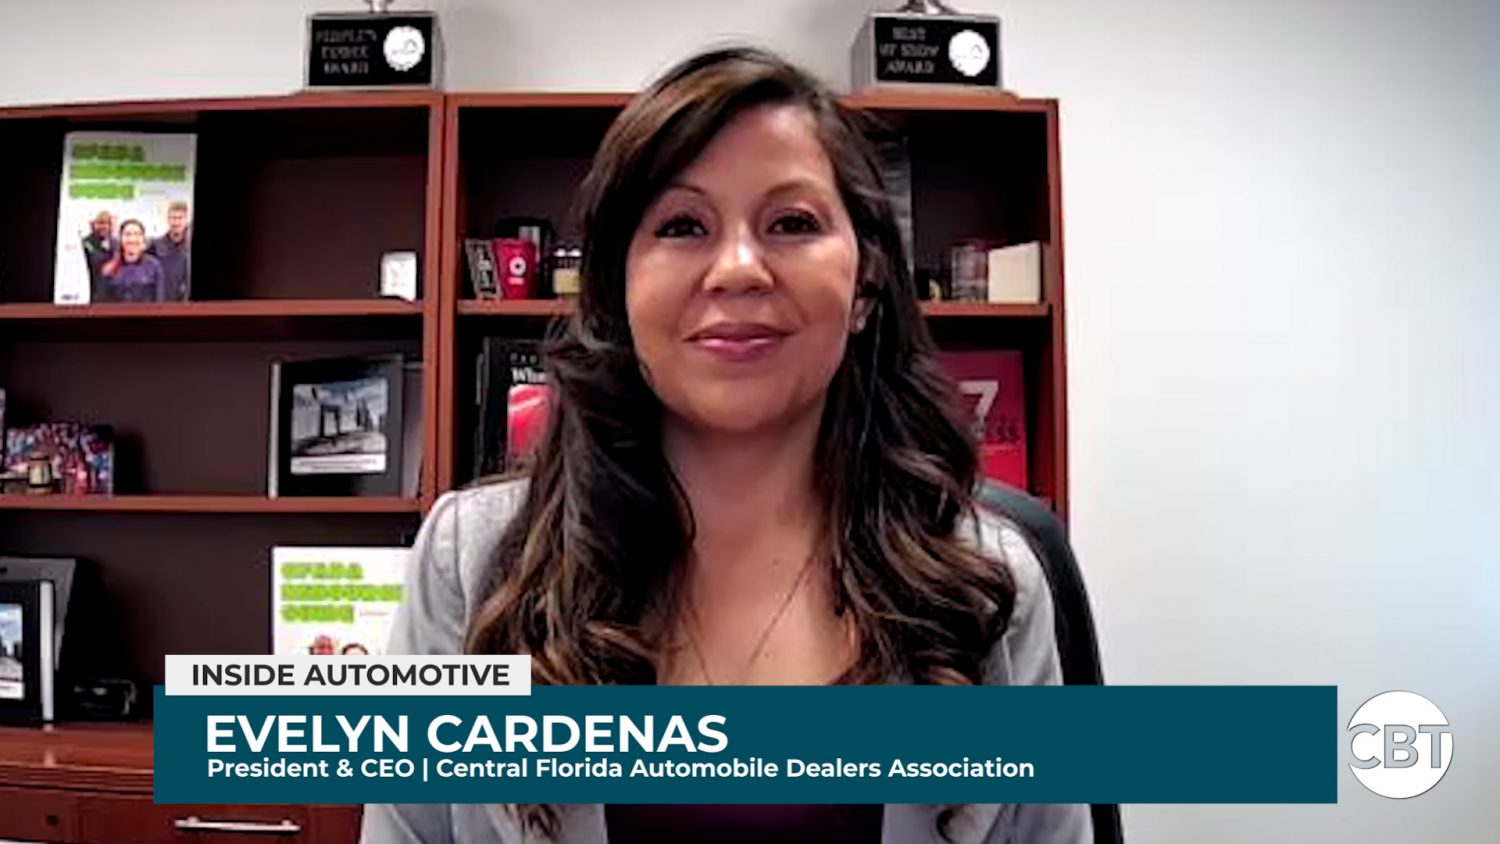 On today's episode of Inside Automotive, Evelyn Cardenas, the President and CEO of the CFADA, joins us to elaborate its new program.